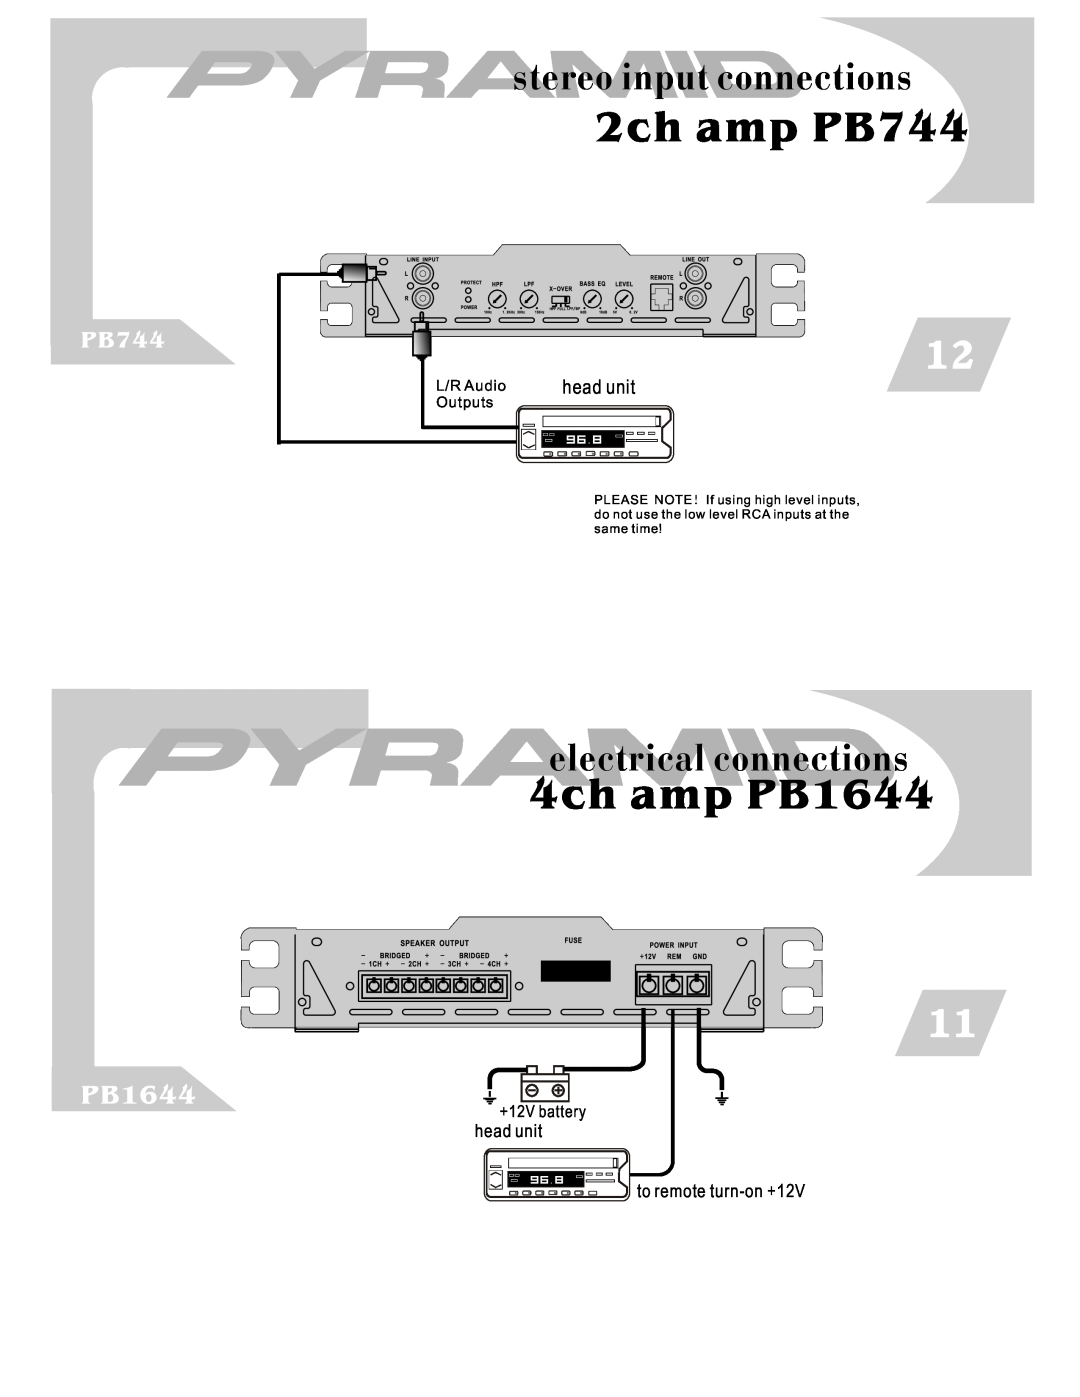 Pyramid Car Audio PB844 stereo input connections, 2ch amp PB744, 4ch amp PB1644, electrical connections, head unit 